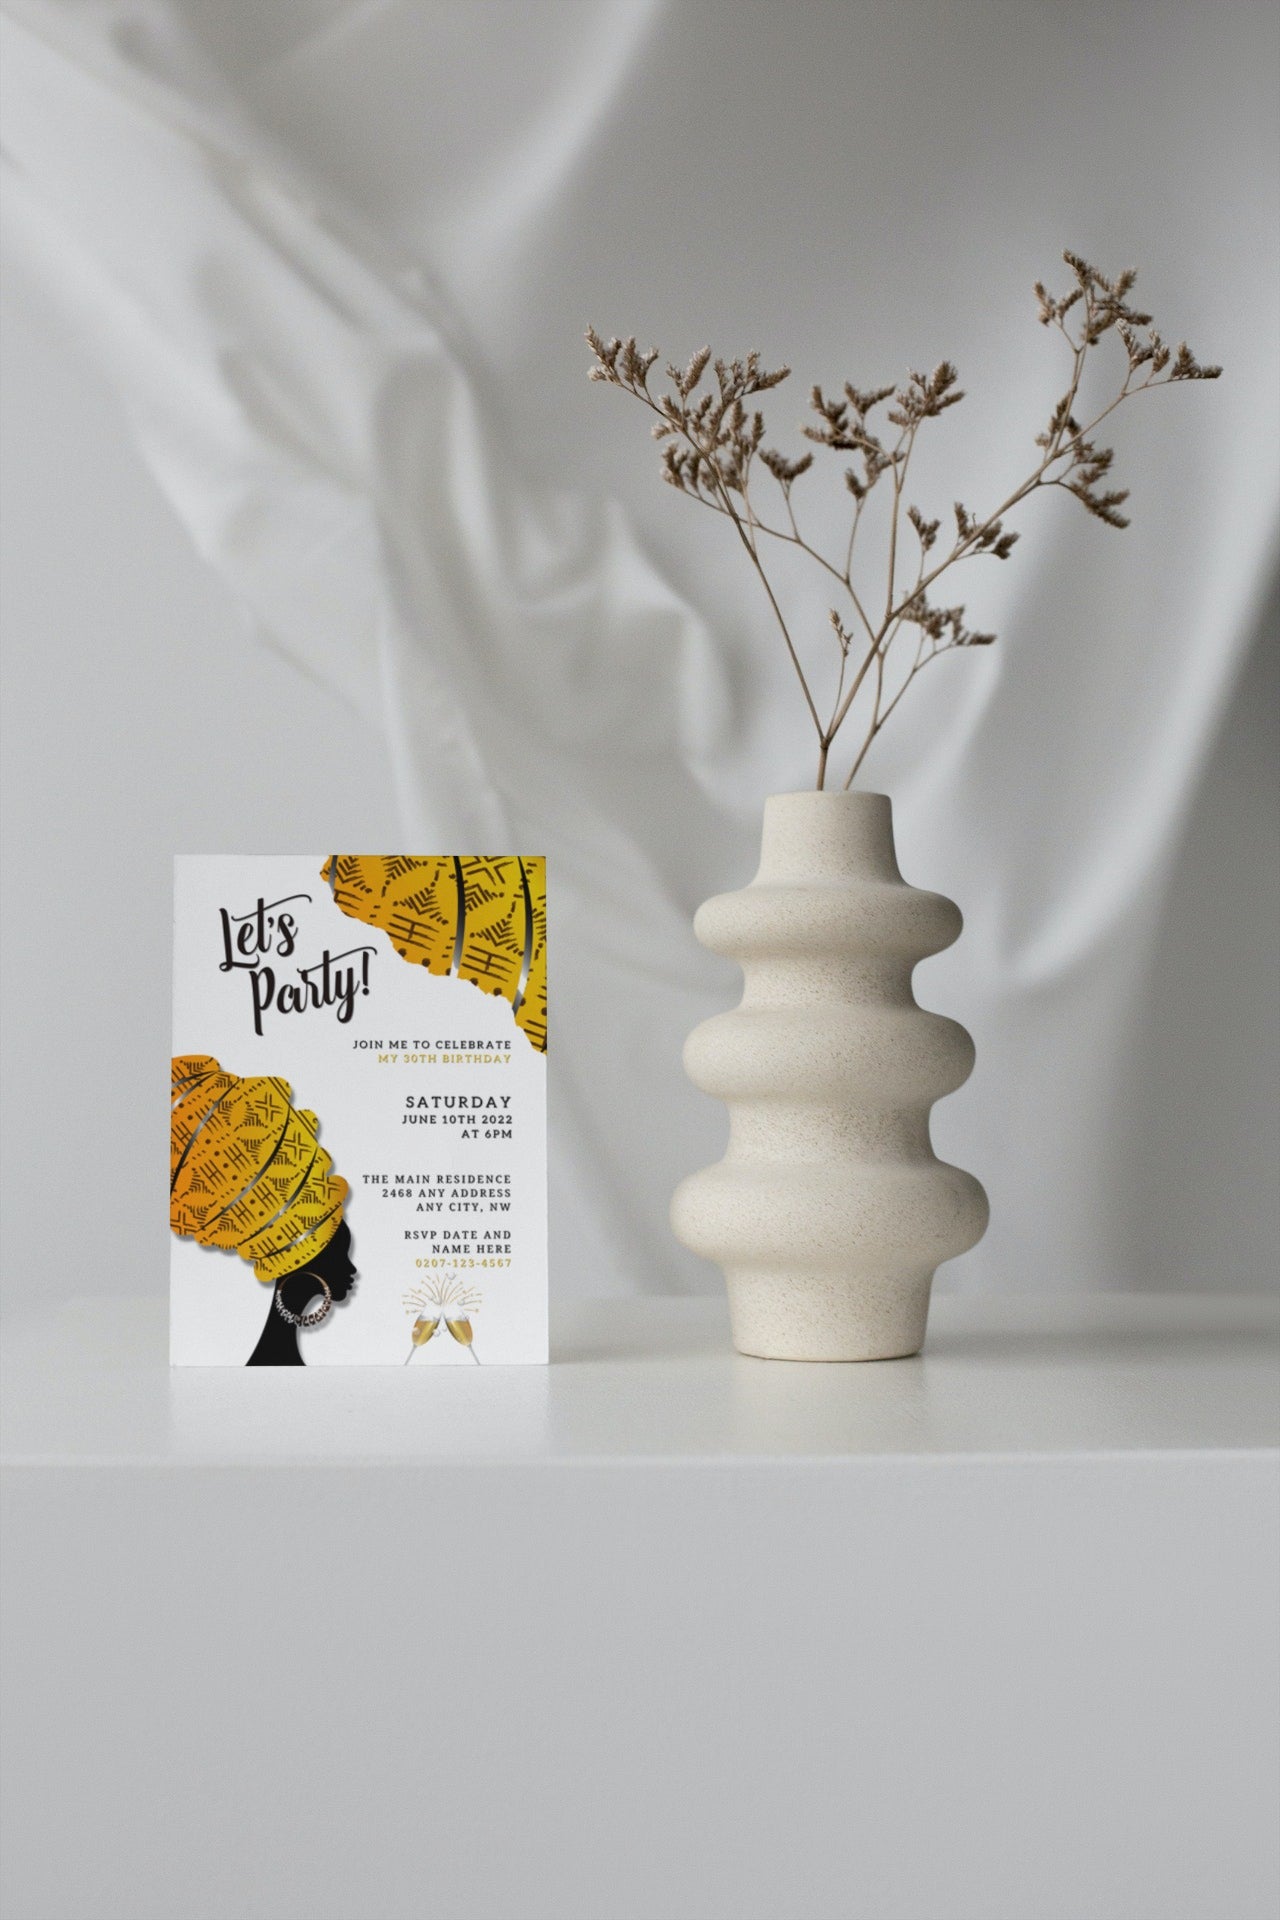 White vase with dried flowers next to a yellow and black invitation card featuring a silhouette of an African woman in a yellow turban.